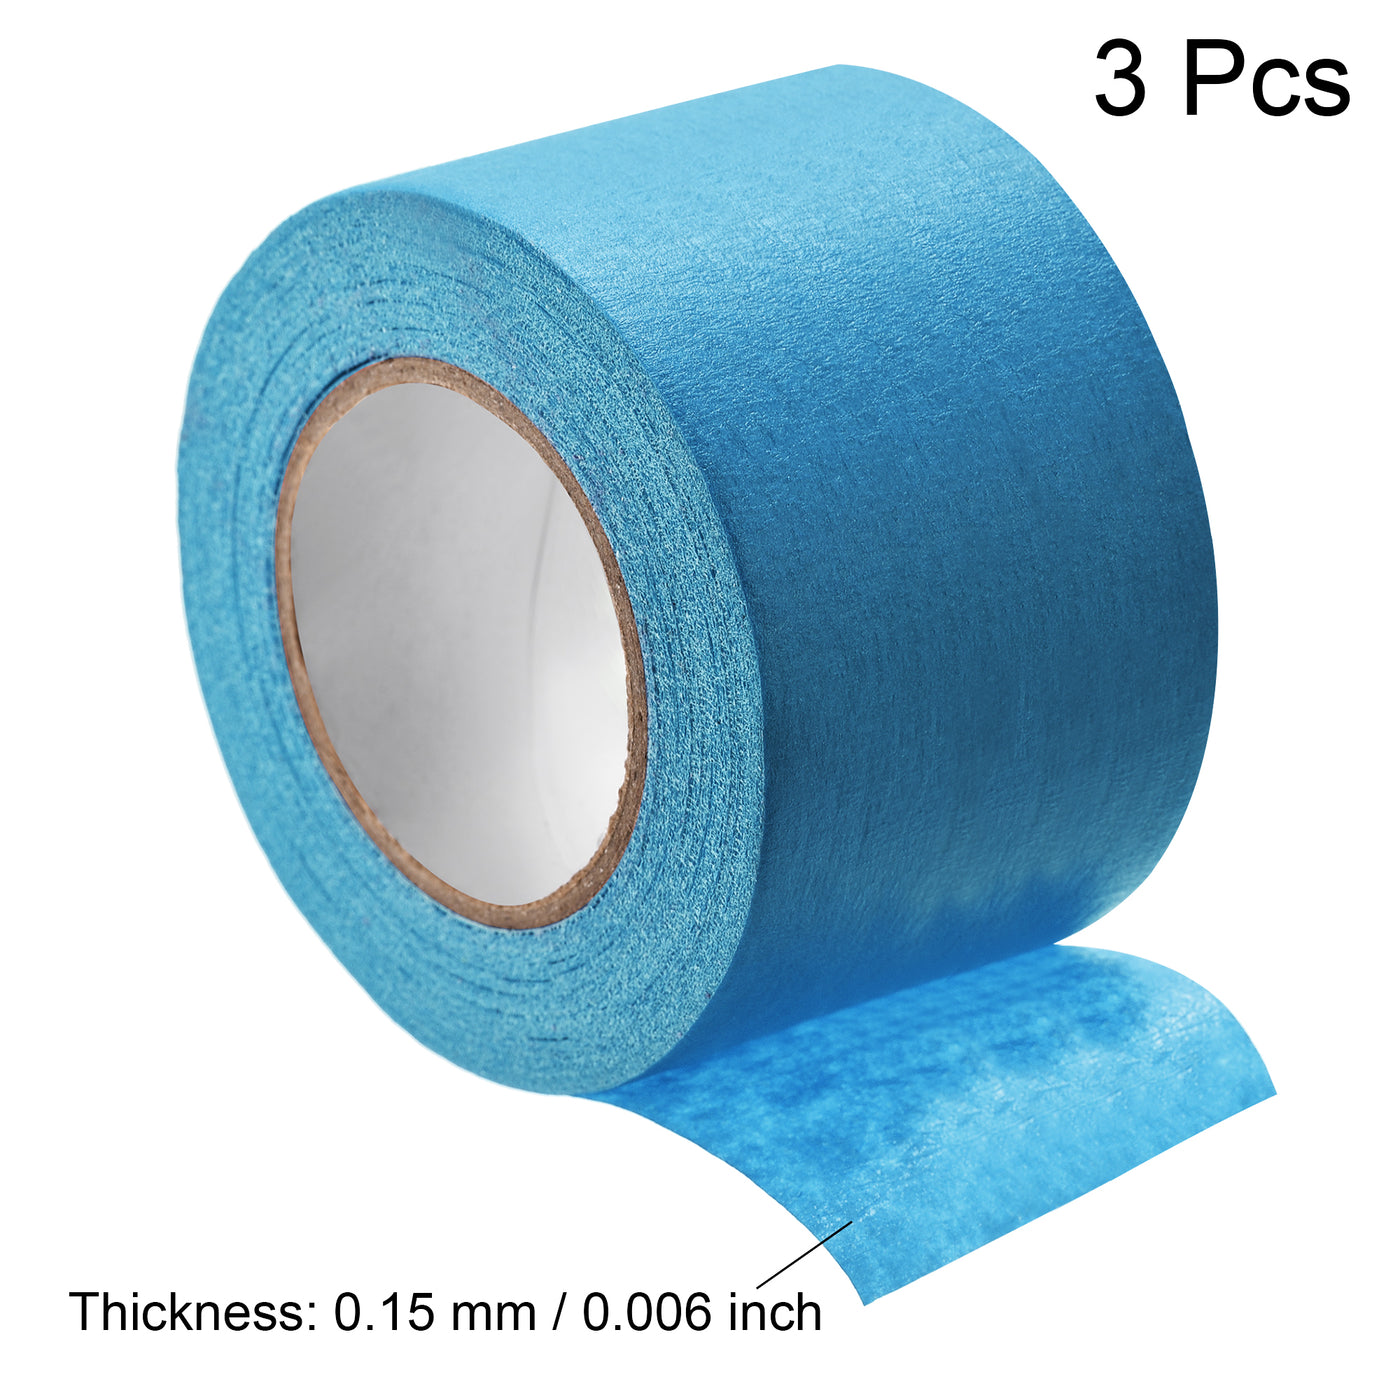 uxcell Uxcell 3Pcs 50mm 2 inch Wide 20m 21 Yards Masking Tape Painters Tape Rolls Light Blue